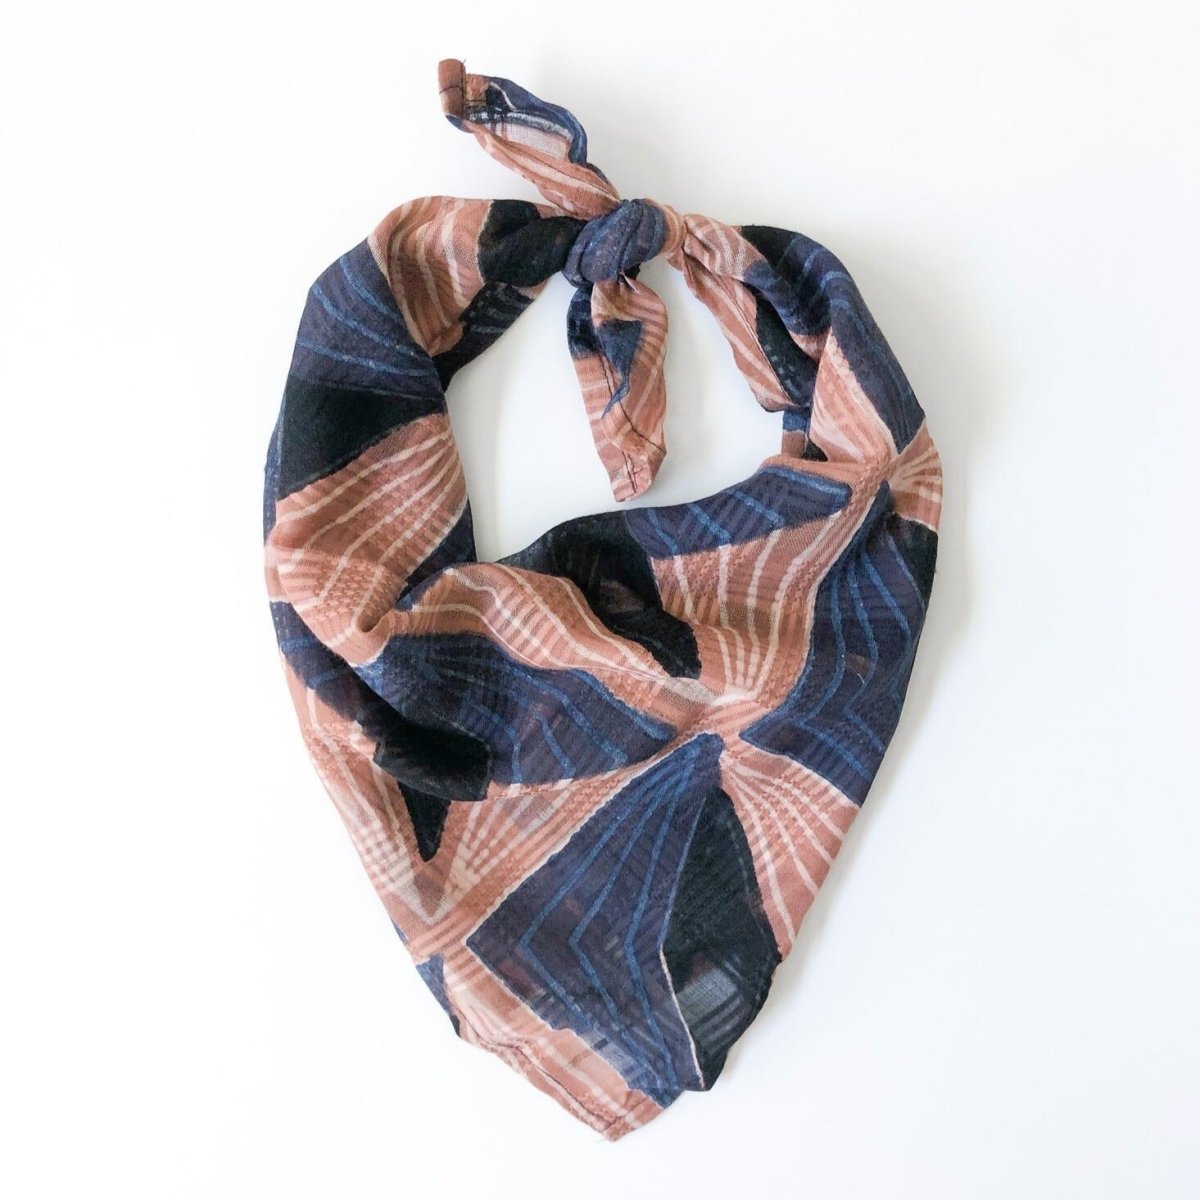 A blue and pink bandana, folded over and tied in a knot. Block printed by hand, the Lola Bandana from Maelu is designed in Portland, Oregon and handmade in India.